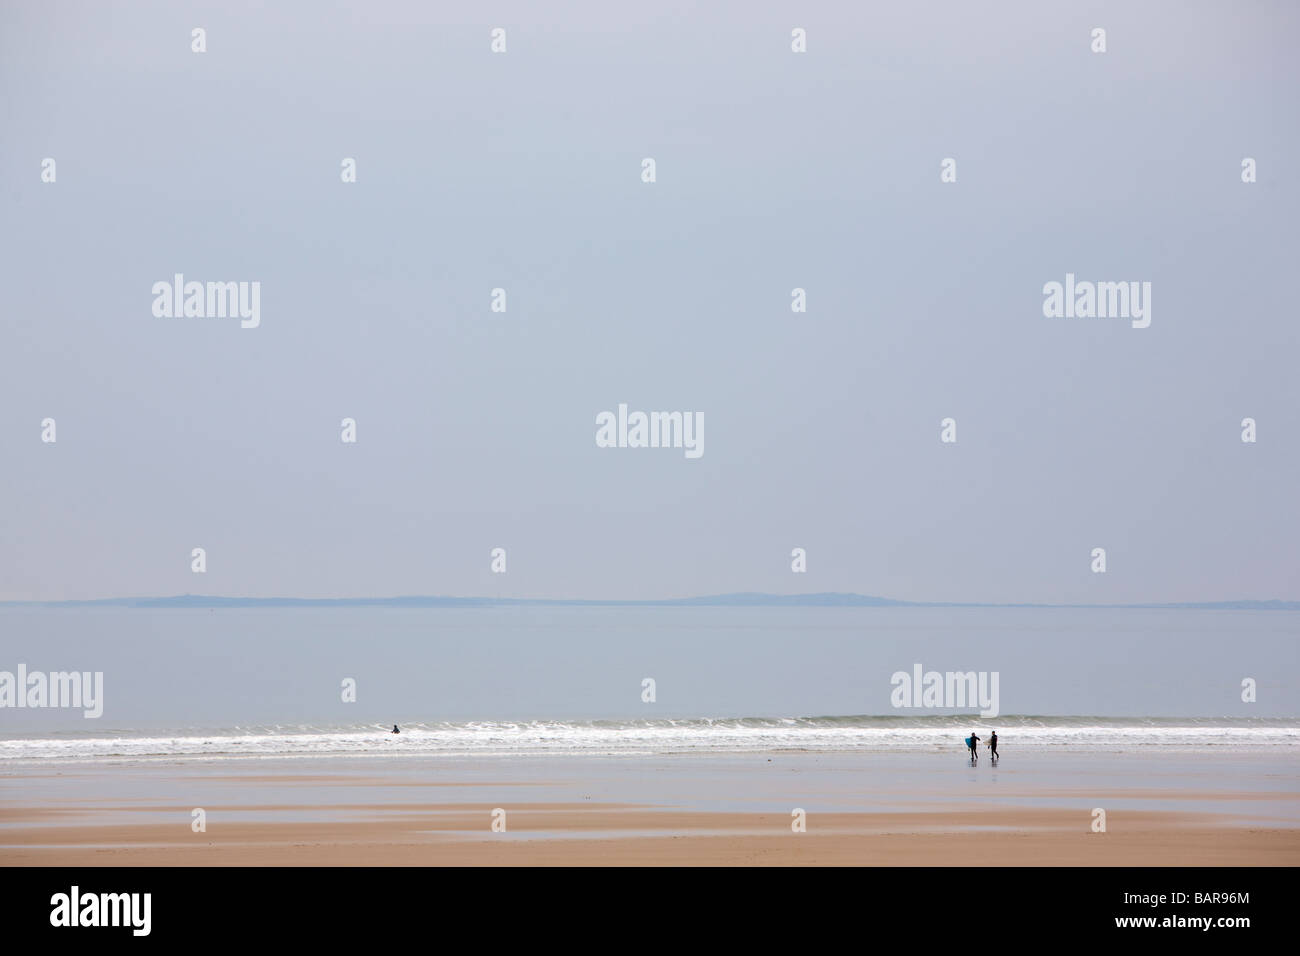 People on a beach under grey skies. Stock Photo